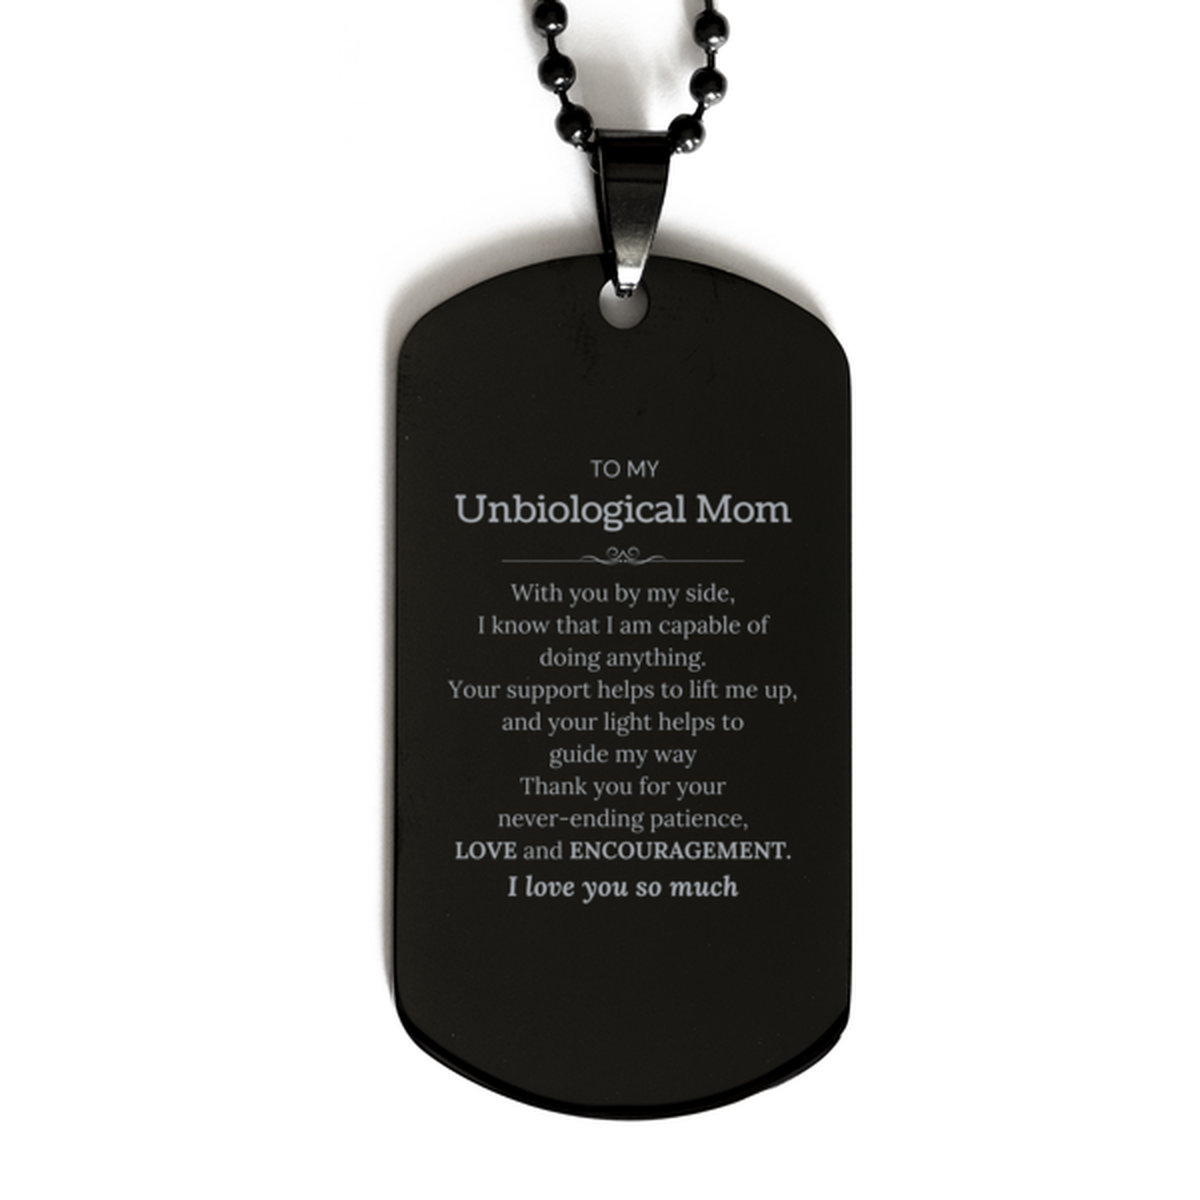 Appreciation Unbiological Mom Black Dog Tag Gifts, To My Unbiological Mom Birthday Christmas Wedding Keepsake Gifts for Unbiological Mom With you by my side, I know that I am capable of doing anything. I love you so much